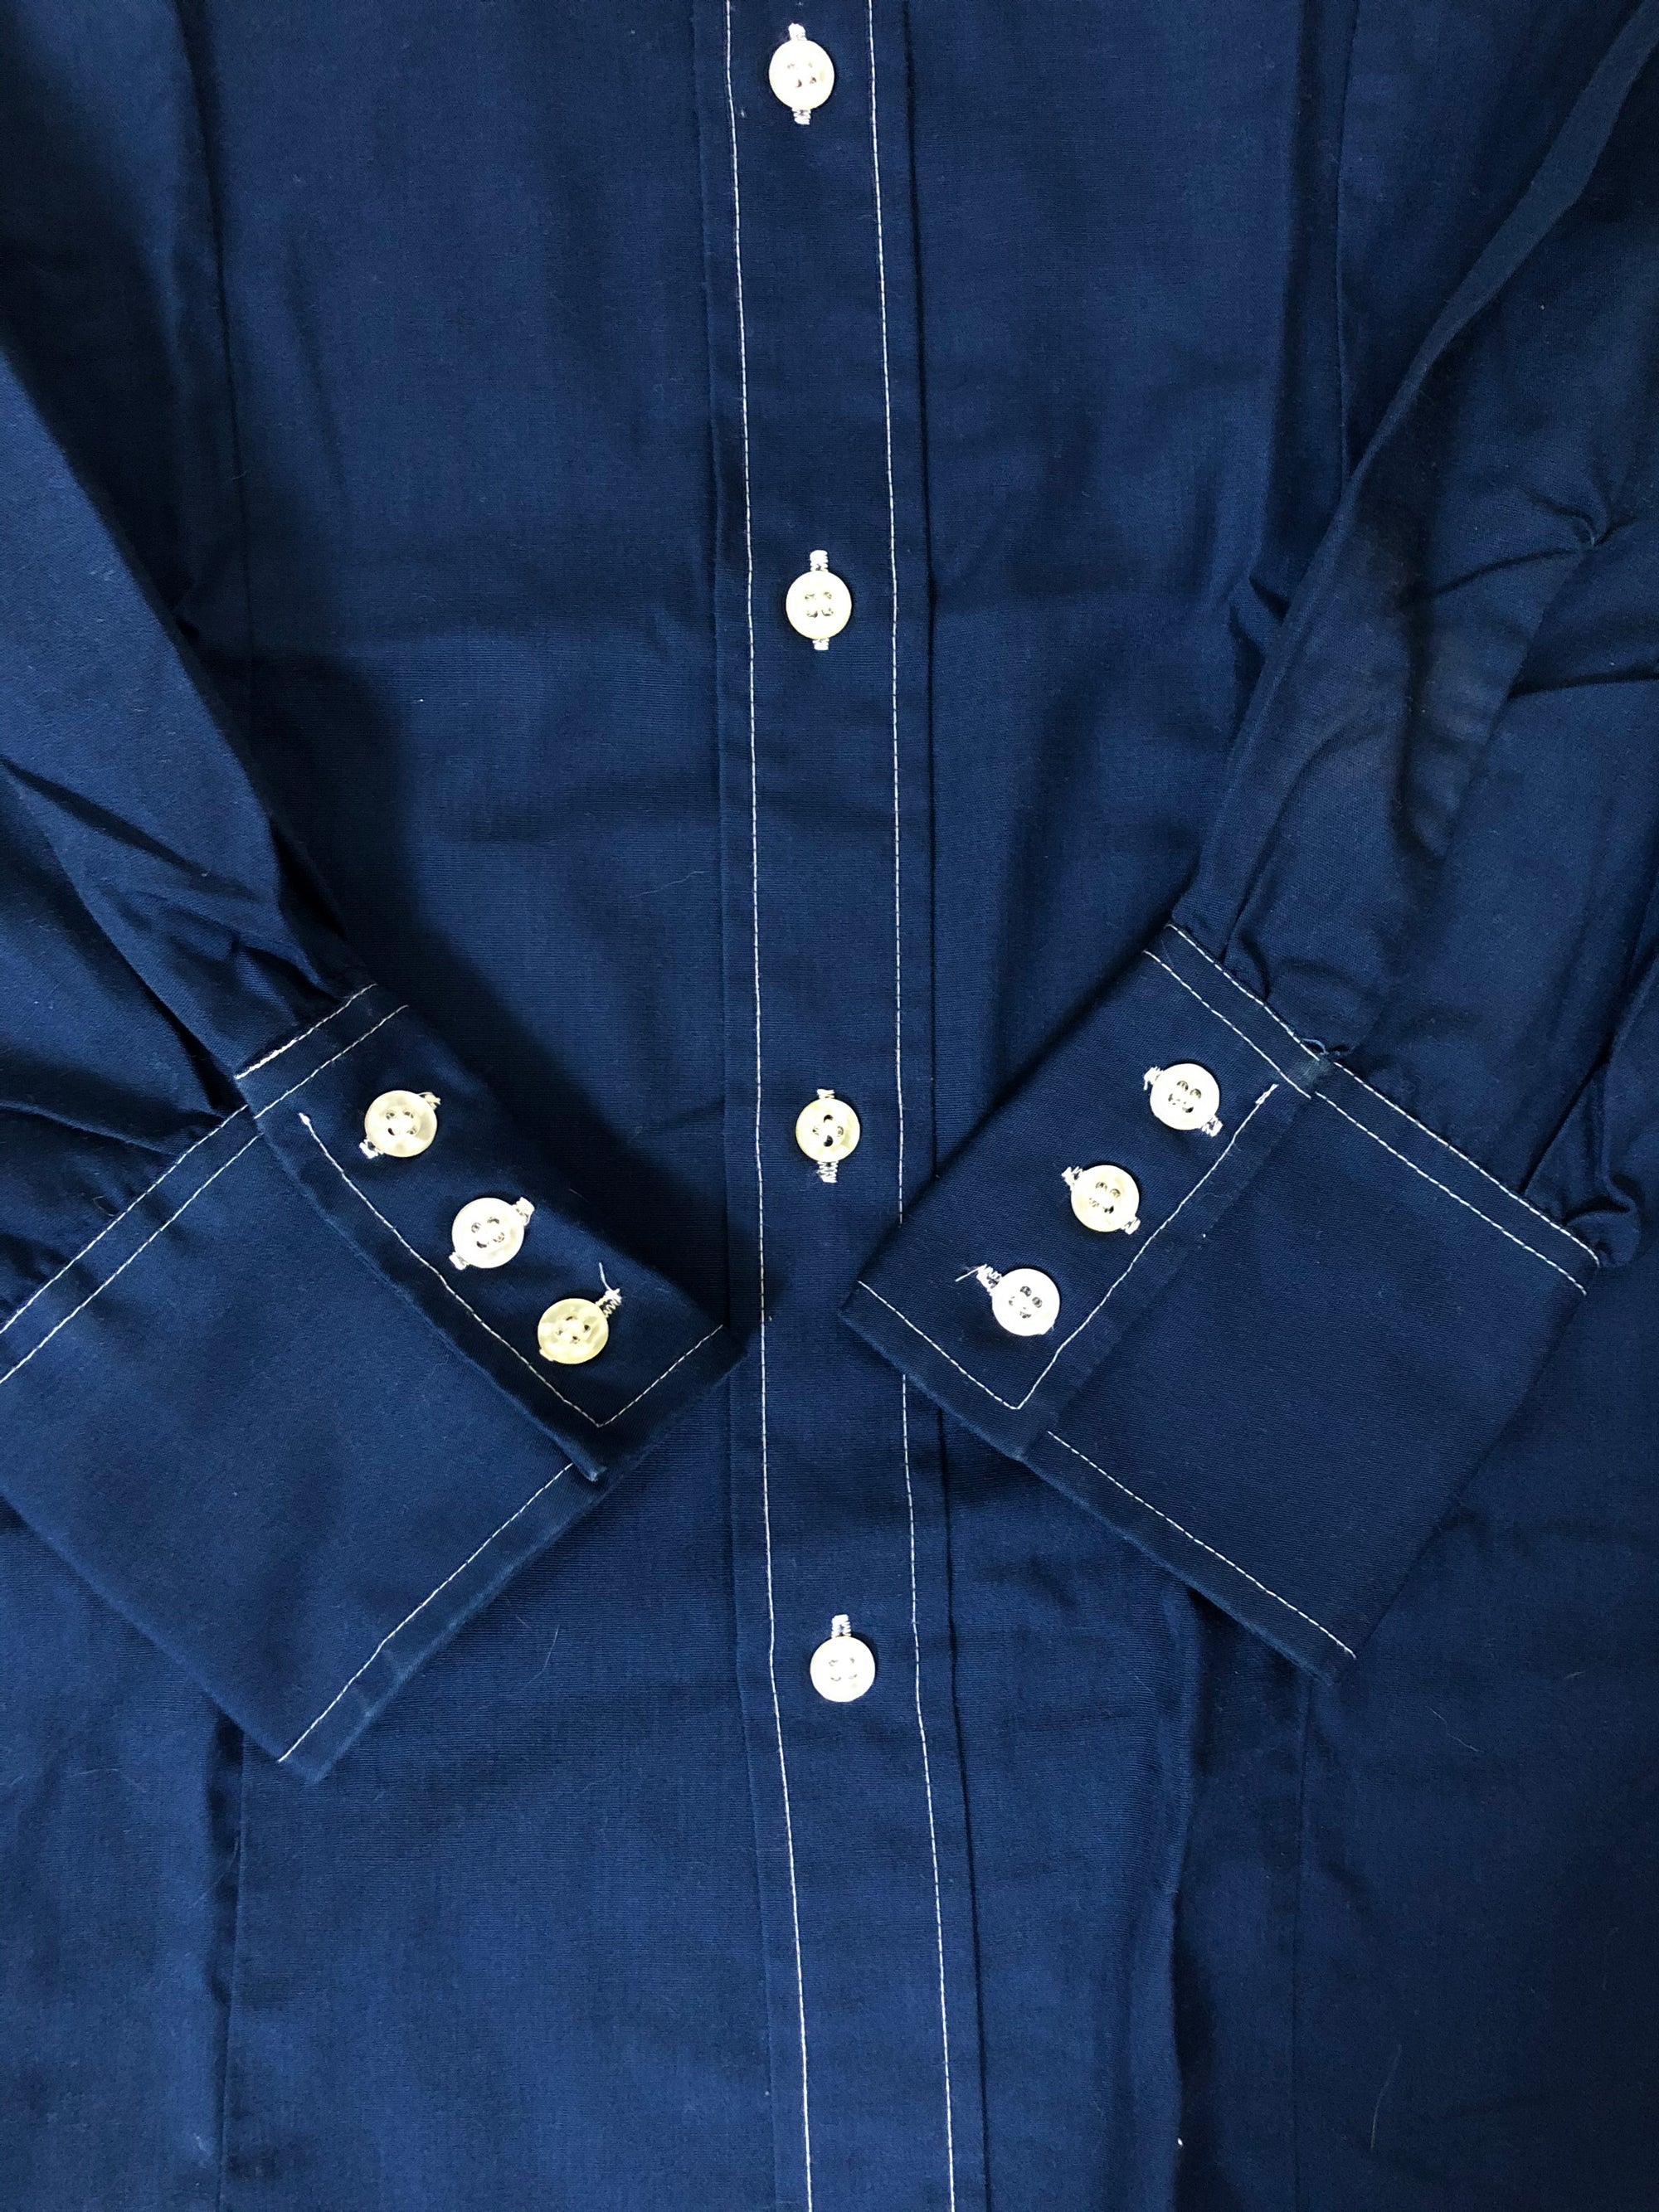 70's Blue Long Sleeve Button Up